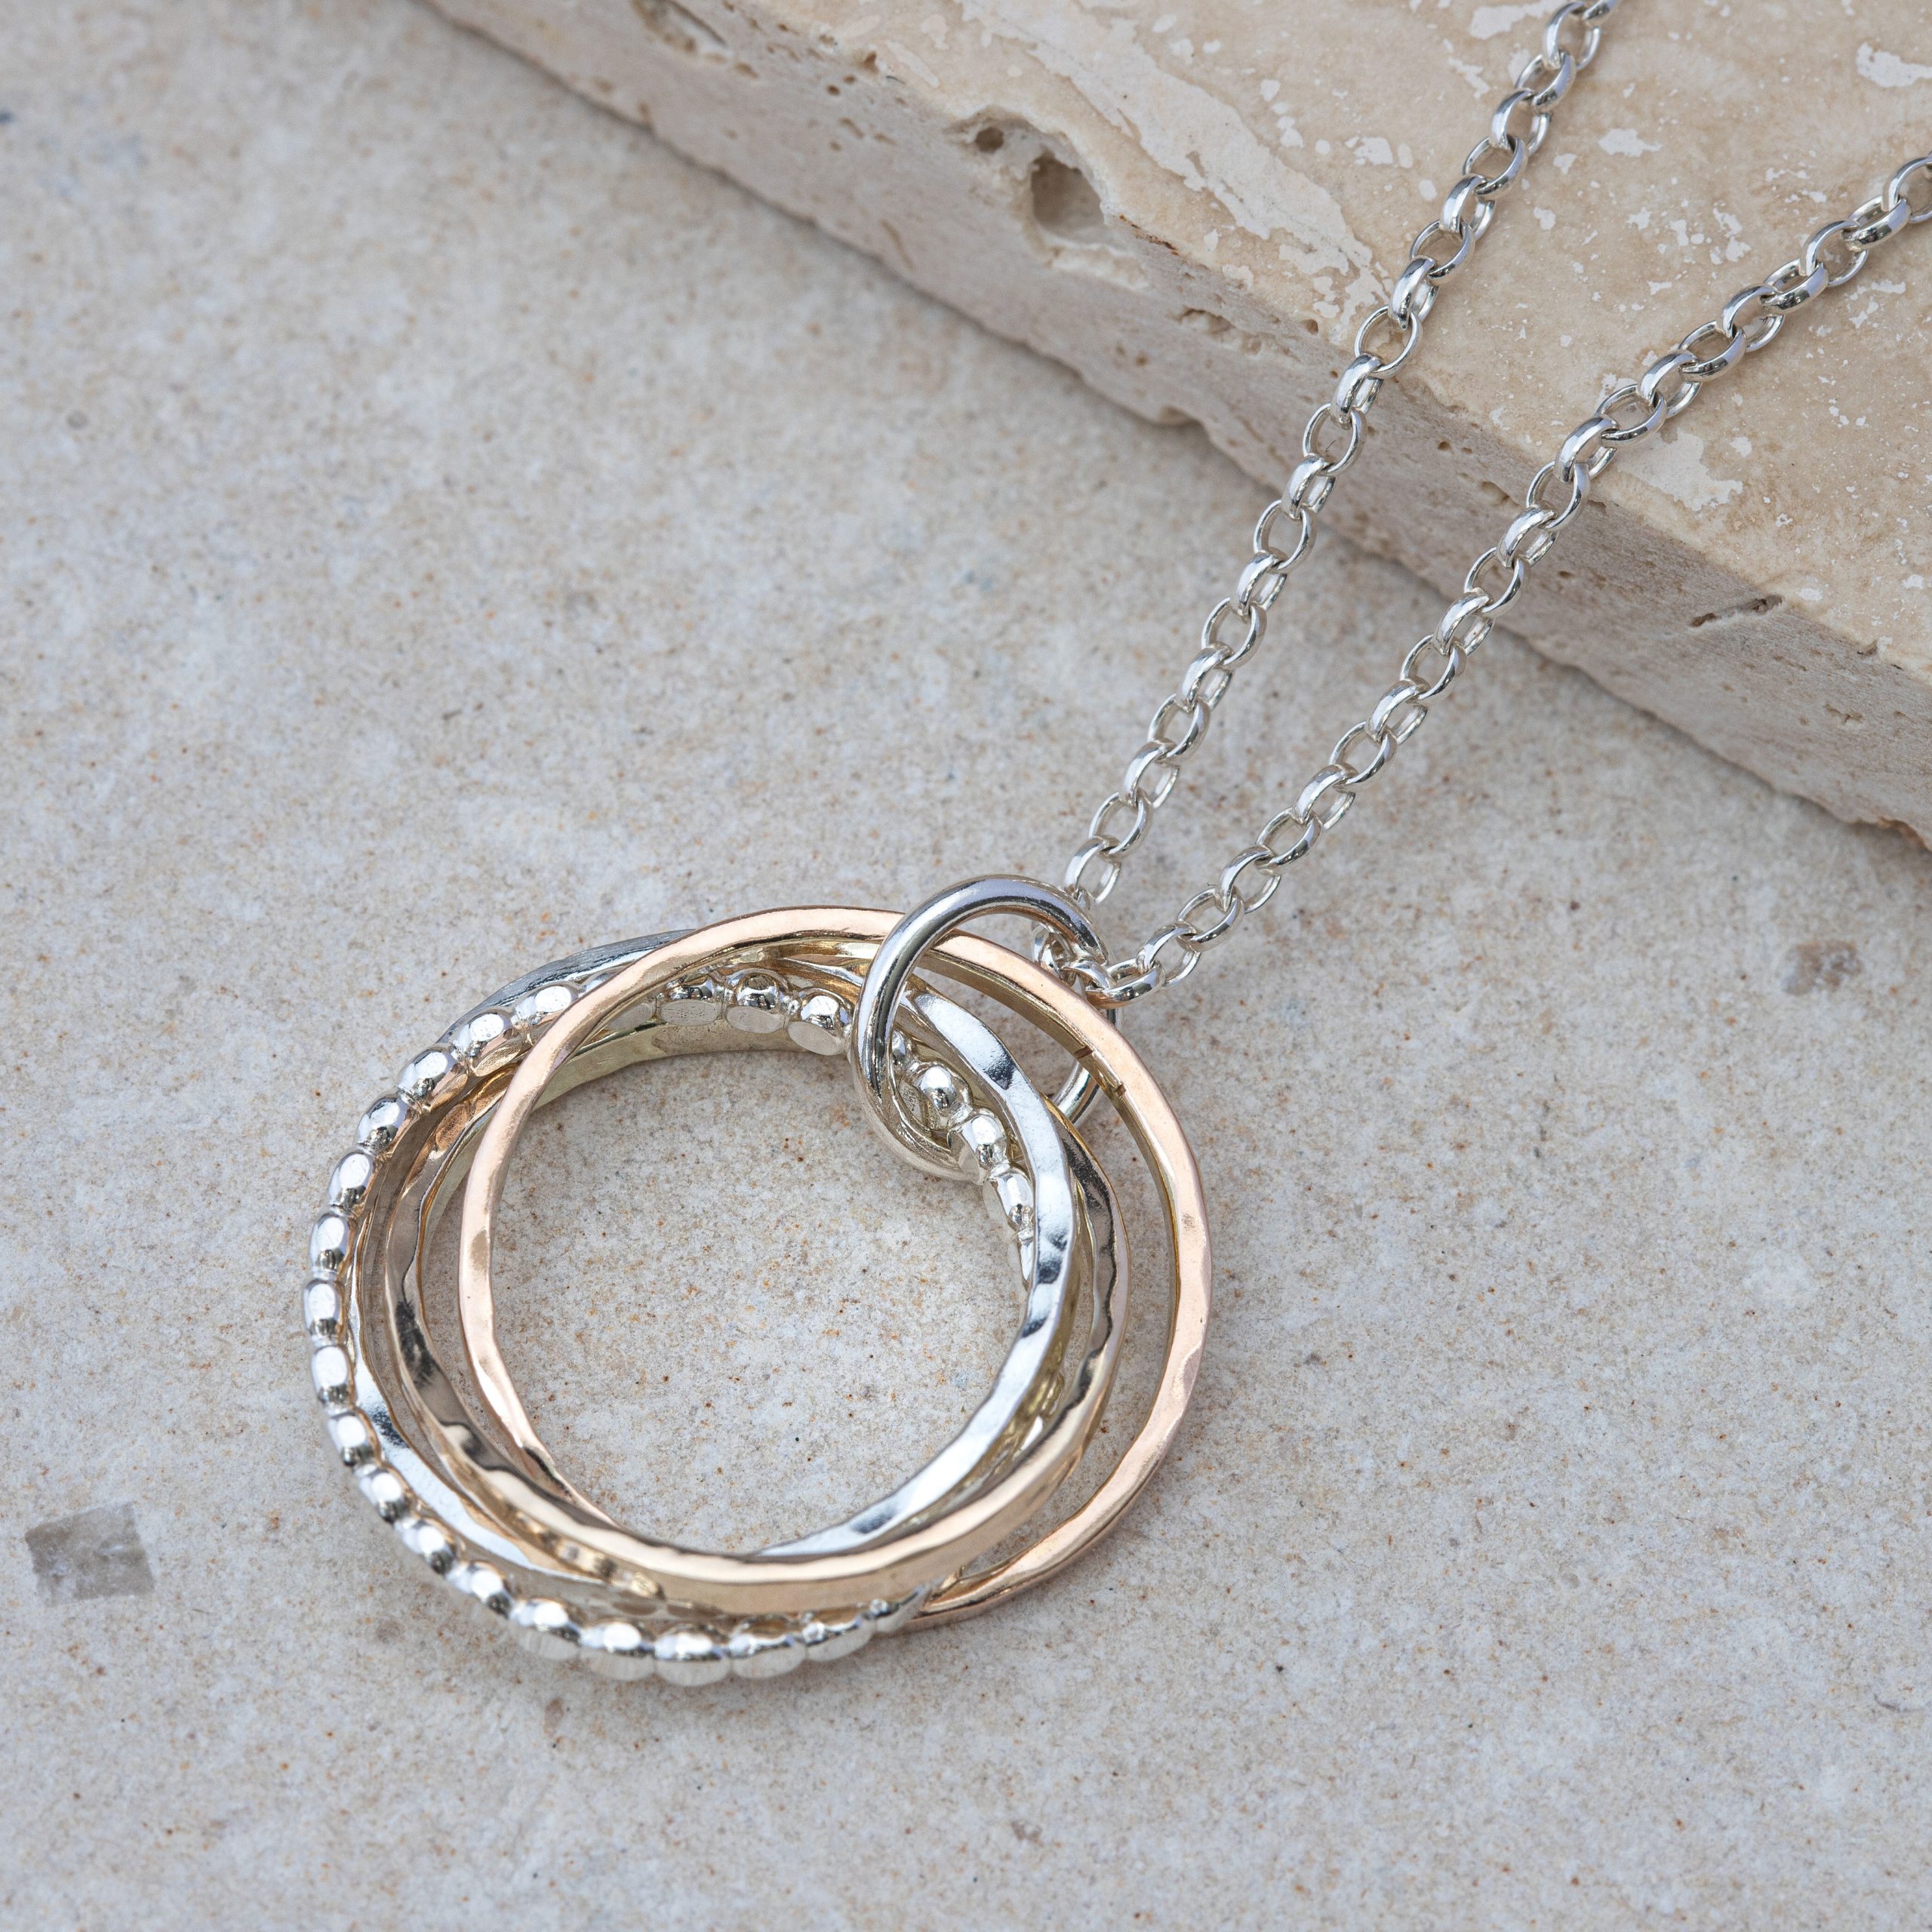 5 Russian Rings Necklace in Premium Silver - MYKA